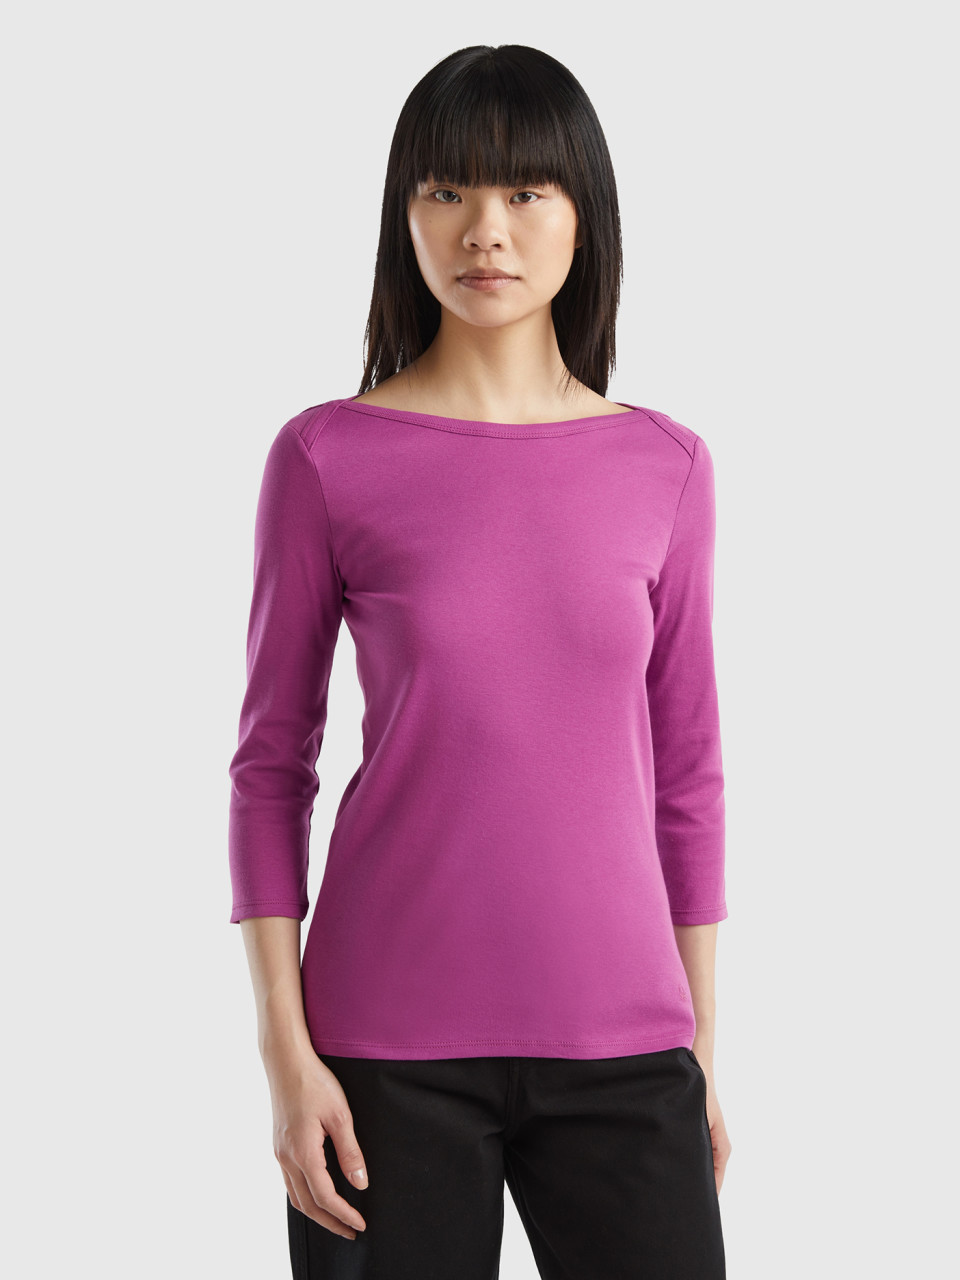 Benetton, T-shirt With Boat Neck In 100% Cotton, Violet, Women